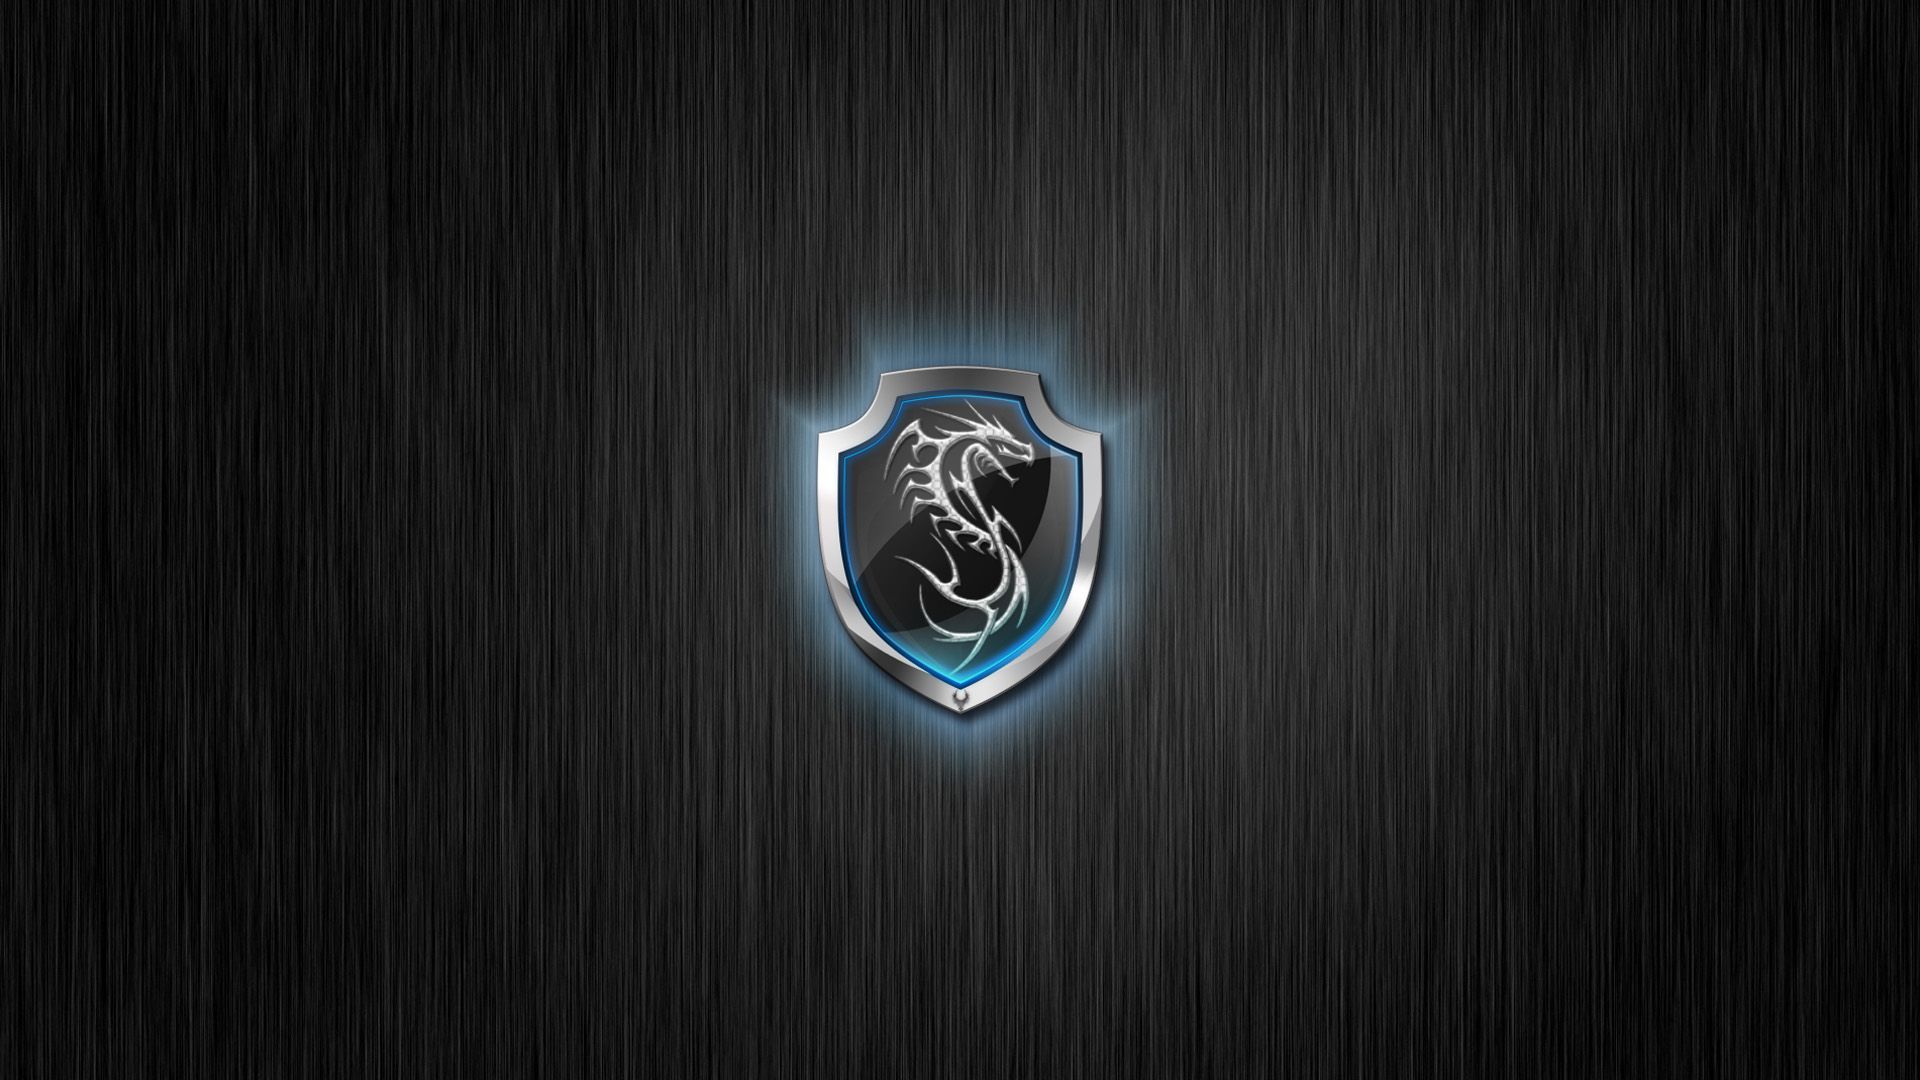 Featured image of post 1440P Msi Dragon Wallpaper / Msi dragon logo wallpaper is also available in different high quality resolution in which 1920×1080, 1600×900, and hd format.